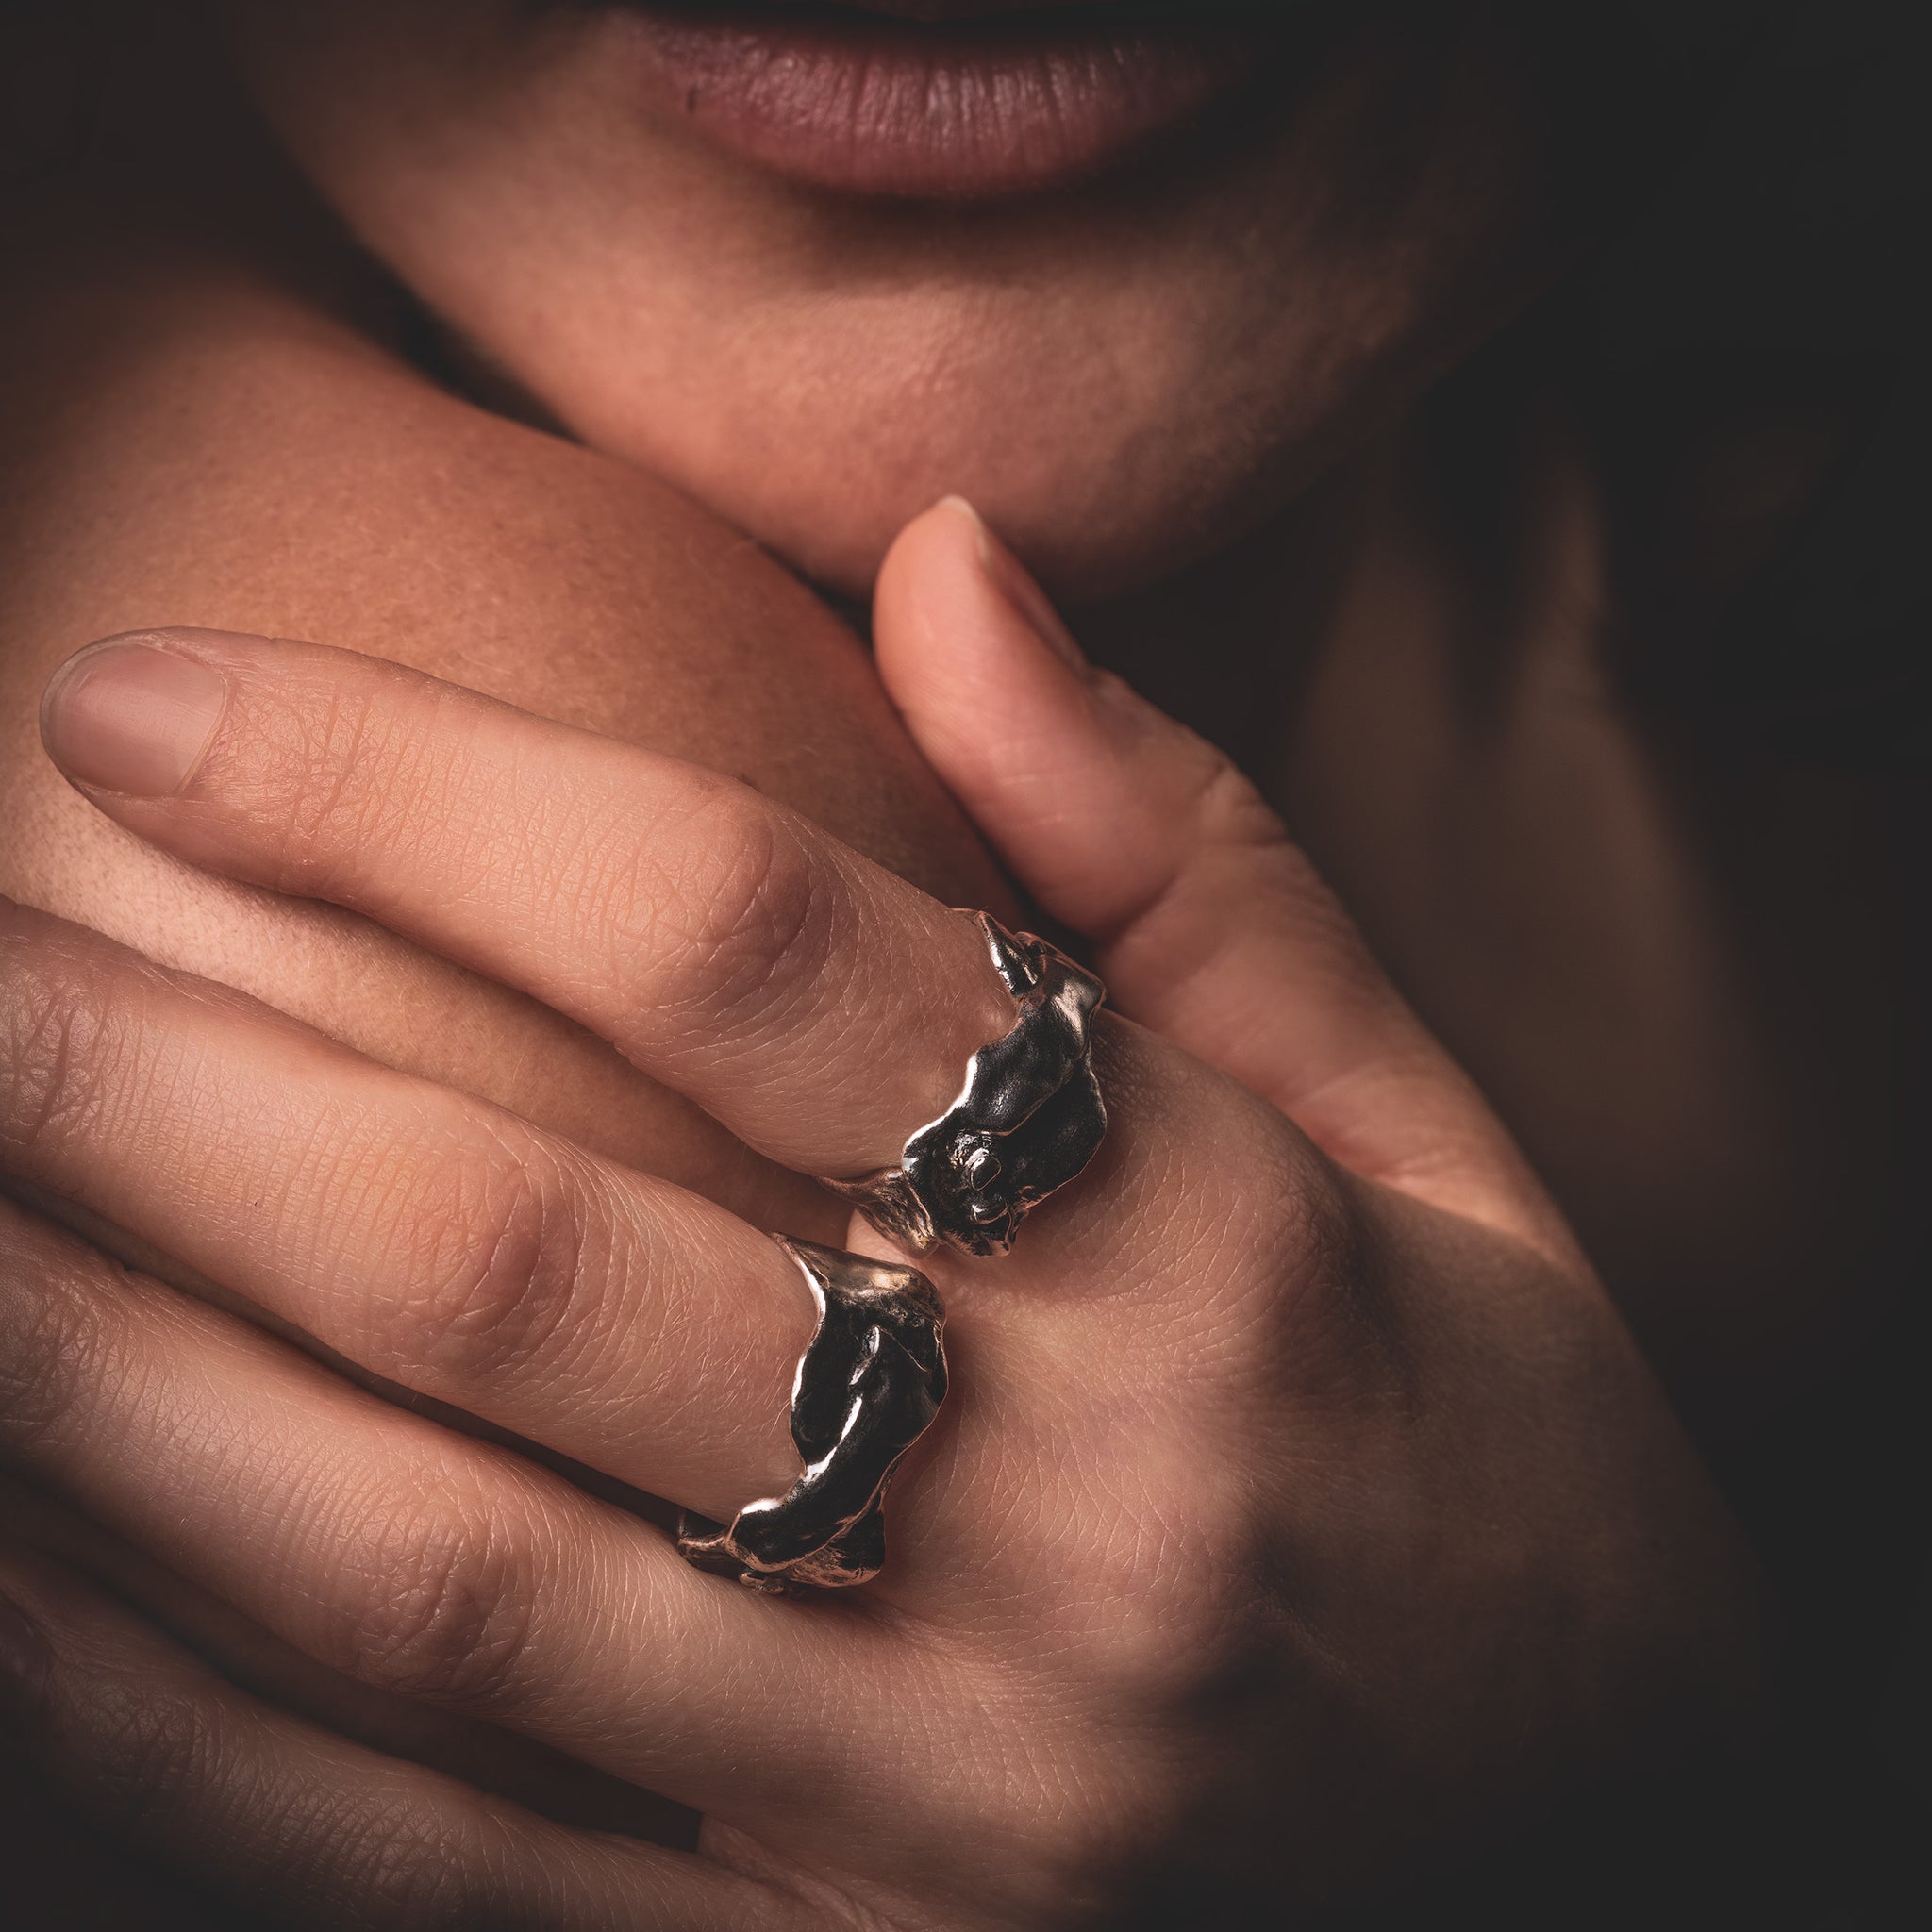 Avalon Ring in Silver by What If You Stayed Jewlery on woman’s hand